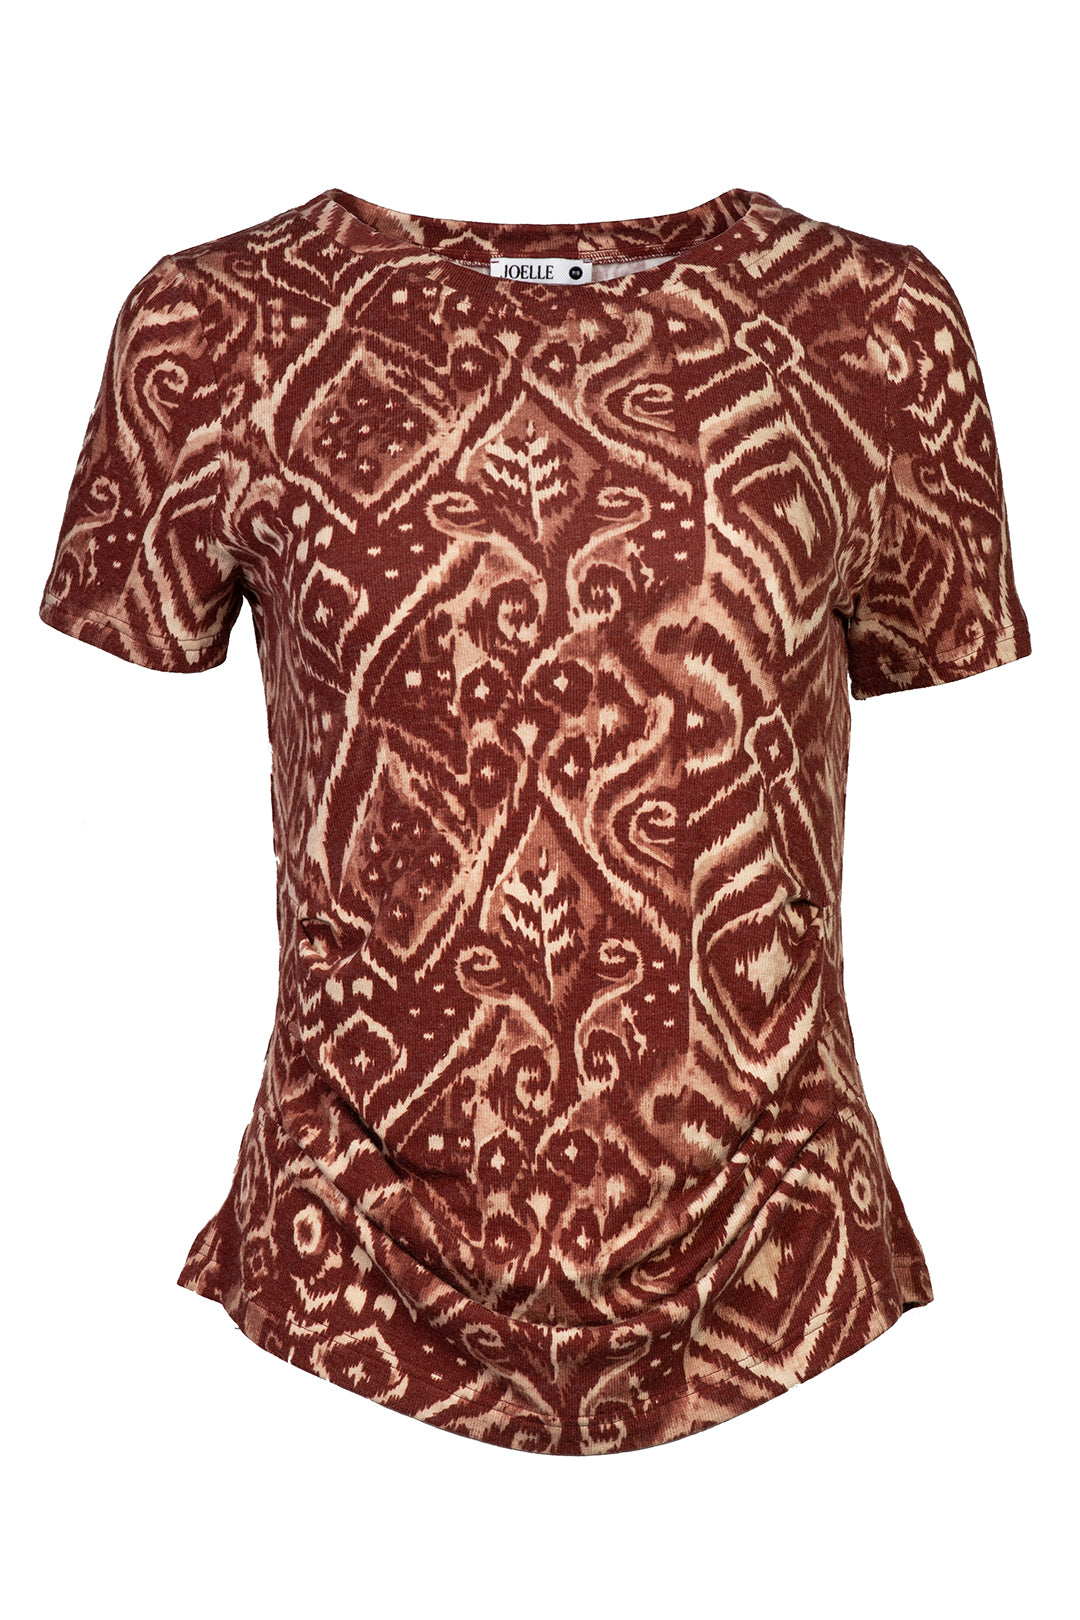 Patterned fitted red t-shirt | Della